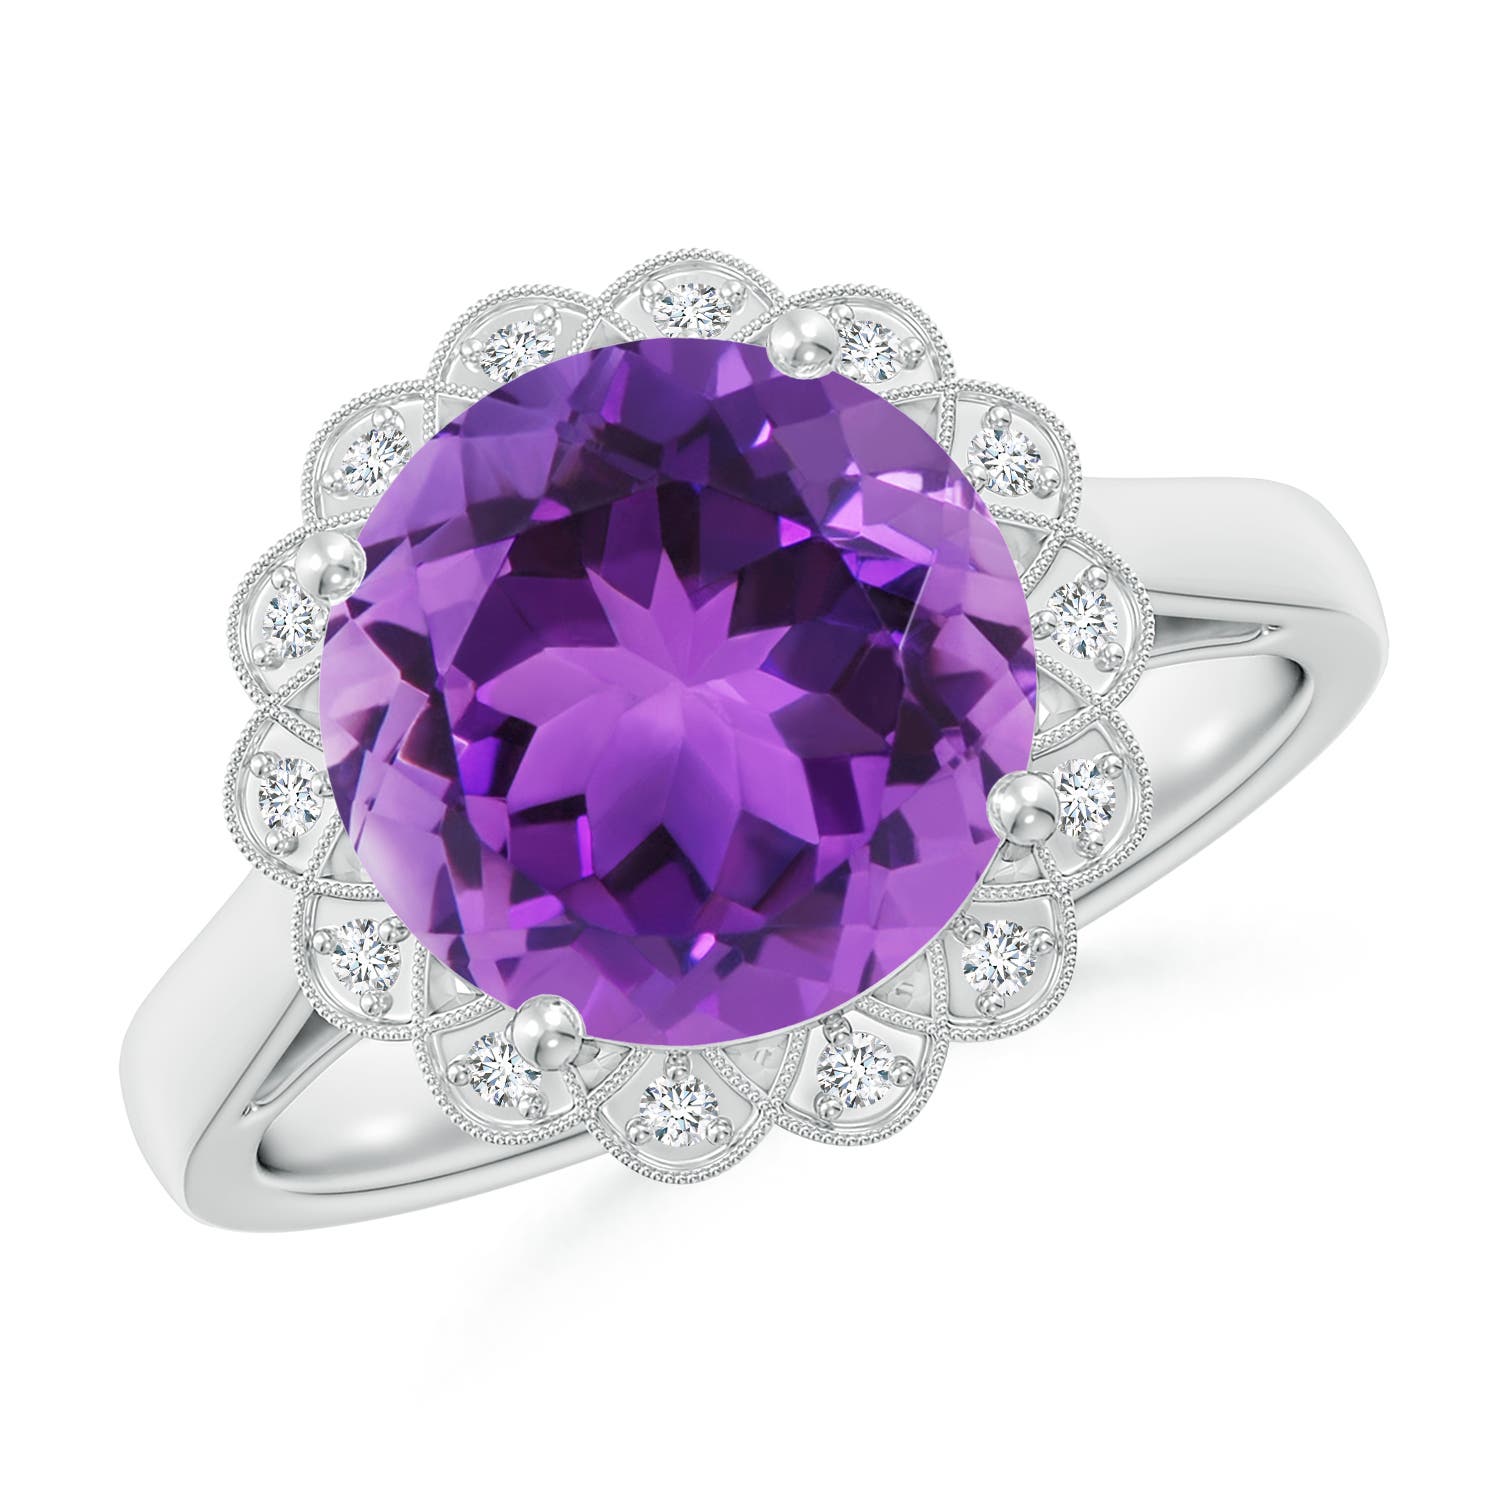 AAA- Amethyst / 3.28 CT / 14 KT White Gold